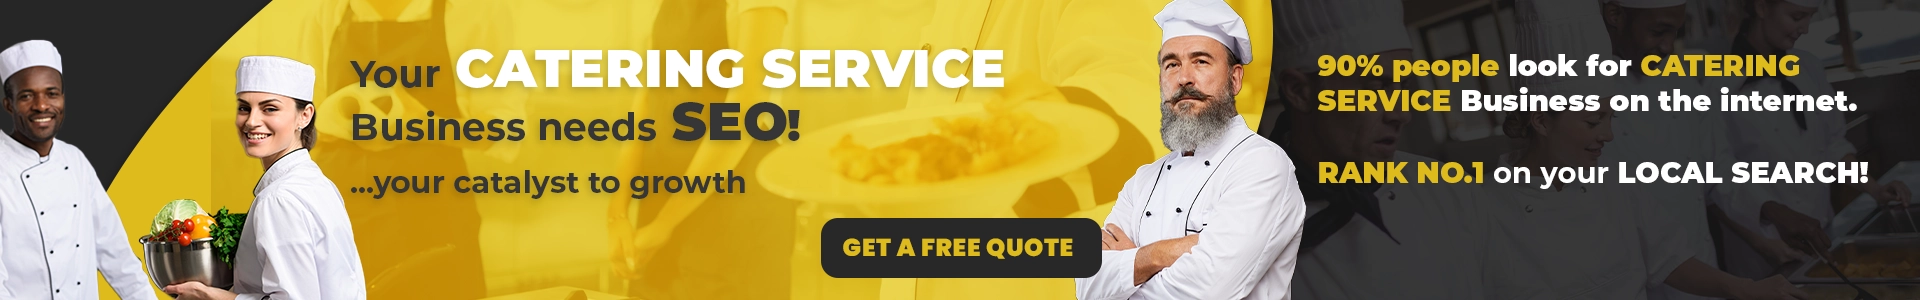 Get A Free Quote